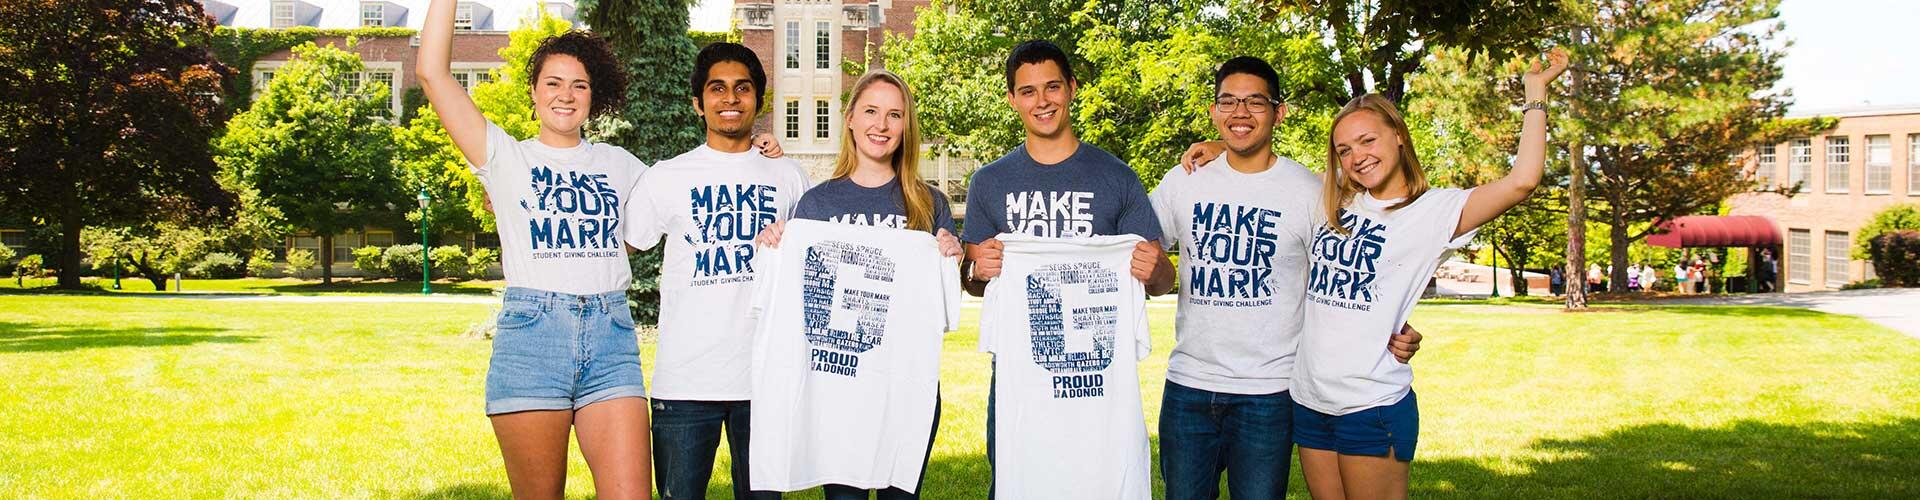 Students in Make Your Mark t-shirts.